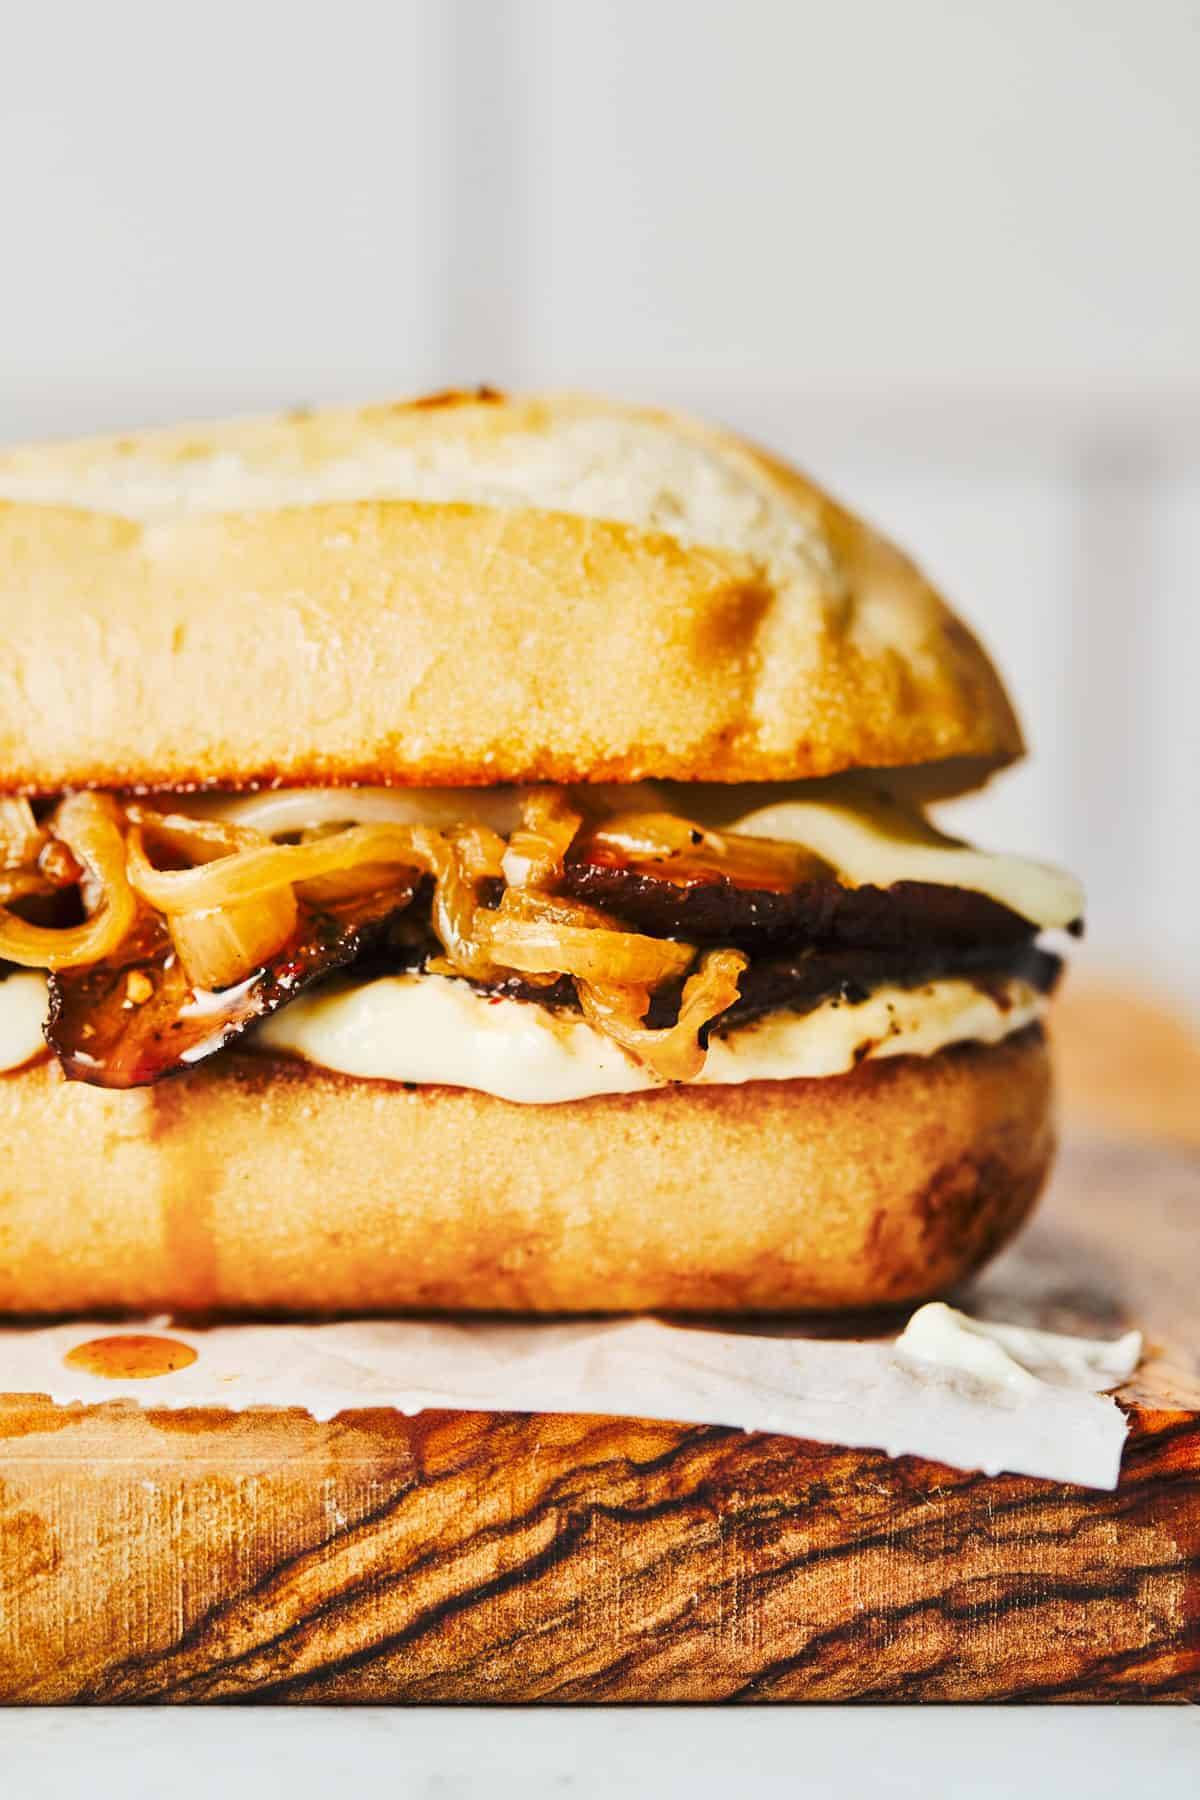 Portobello french dip on a roll with caramelized onions.